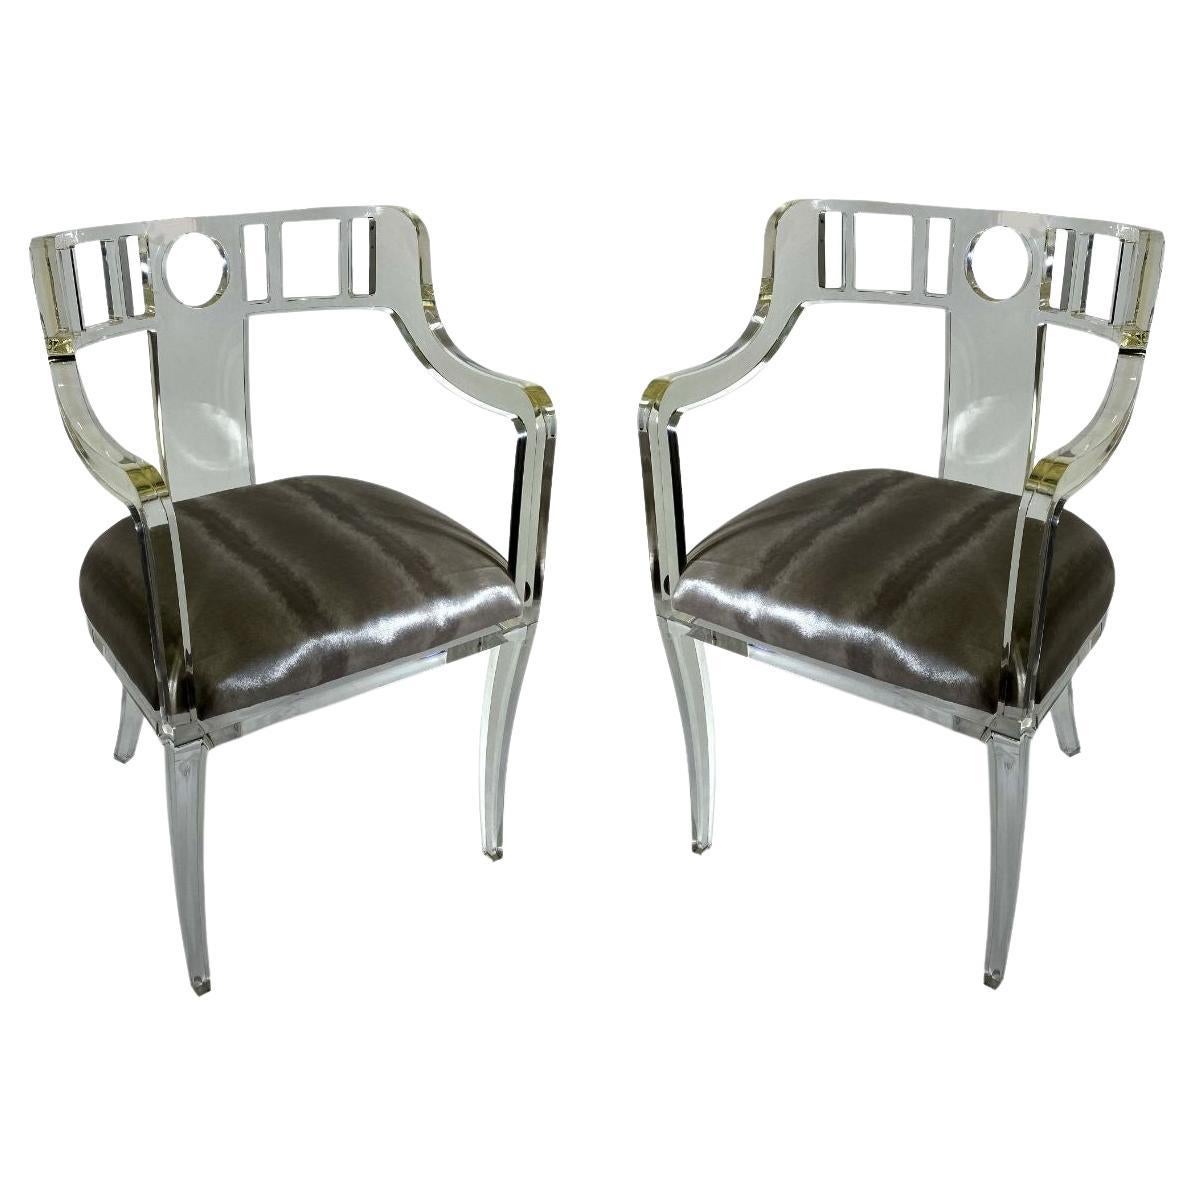 Pair of American Modern Lucite Chair Armchairs, Geoffrey Bradfield For Sale